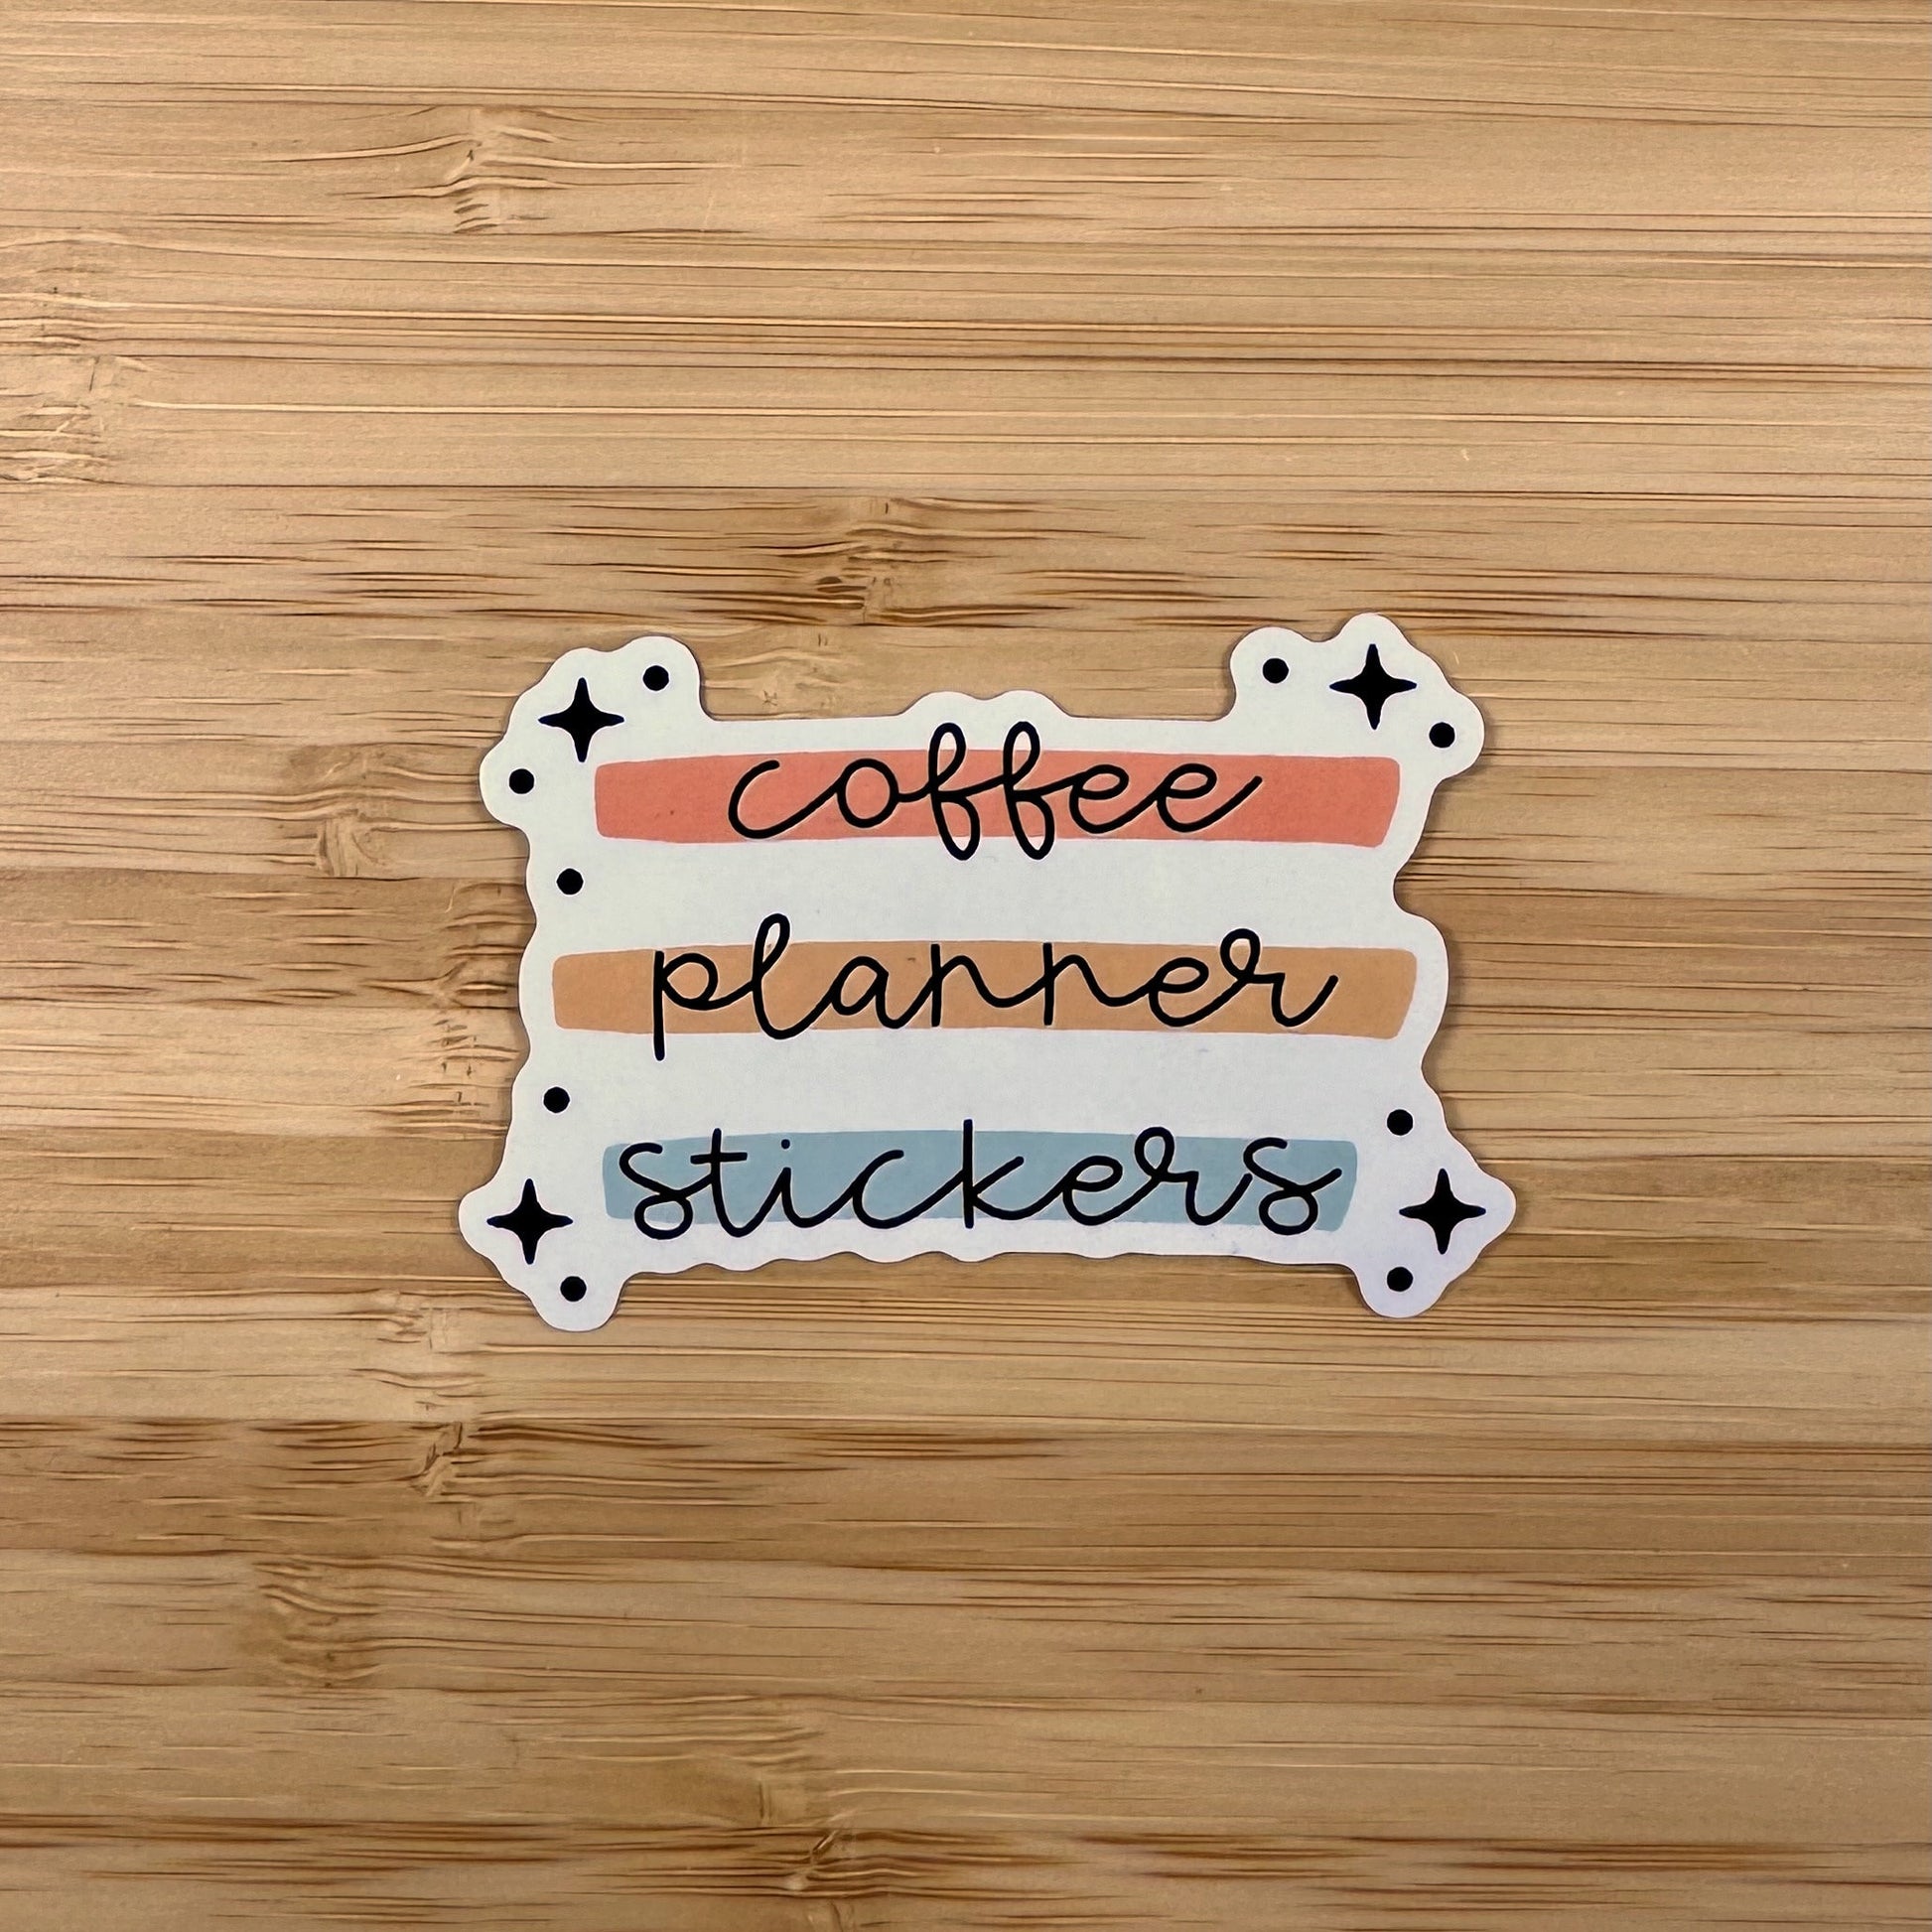 a sticker that says coffee planner stickers on a wooden surface